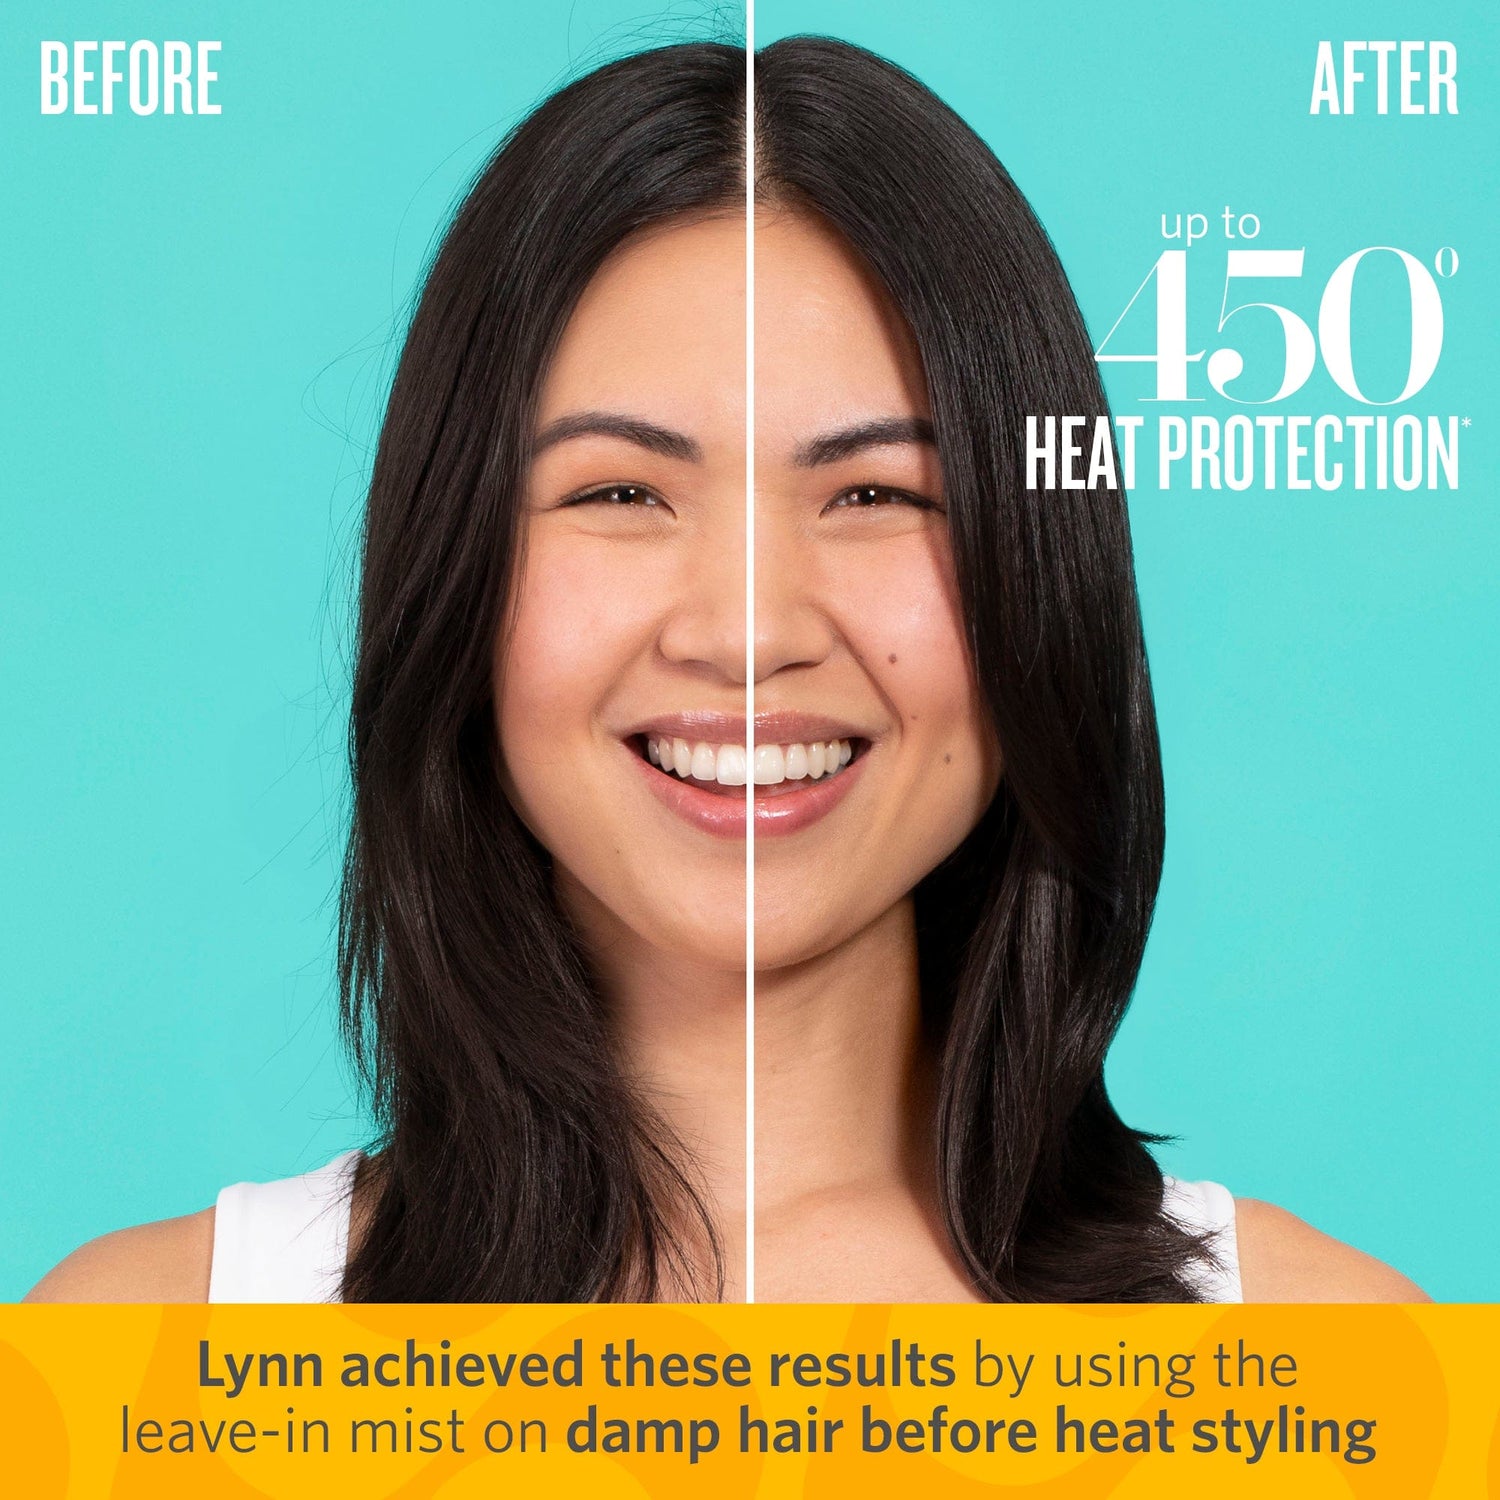 Before after | up to 450 degrees heat protection | Lynn achieved these results by using the leave-in mist on damp hair before heat styling